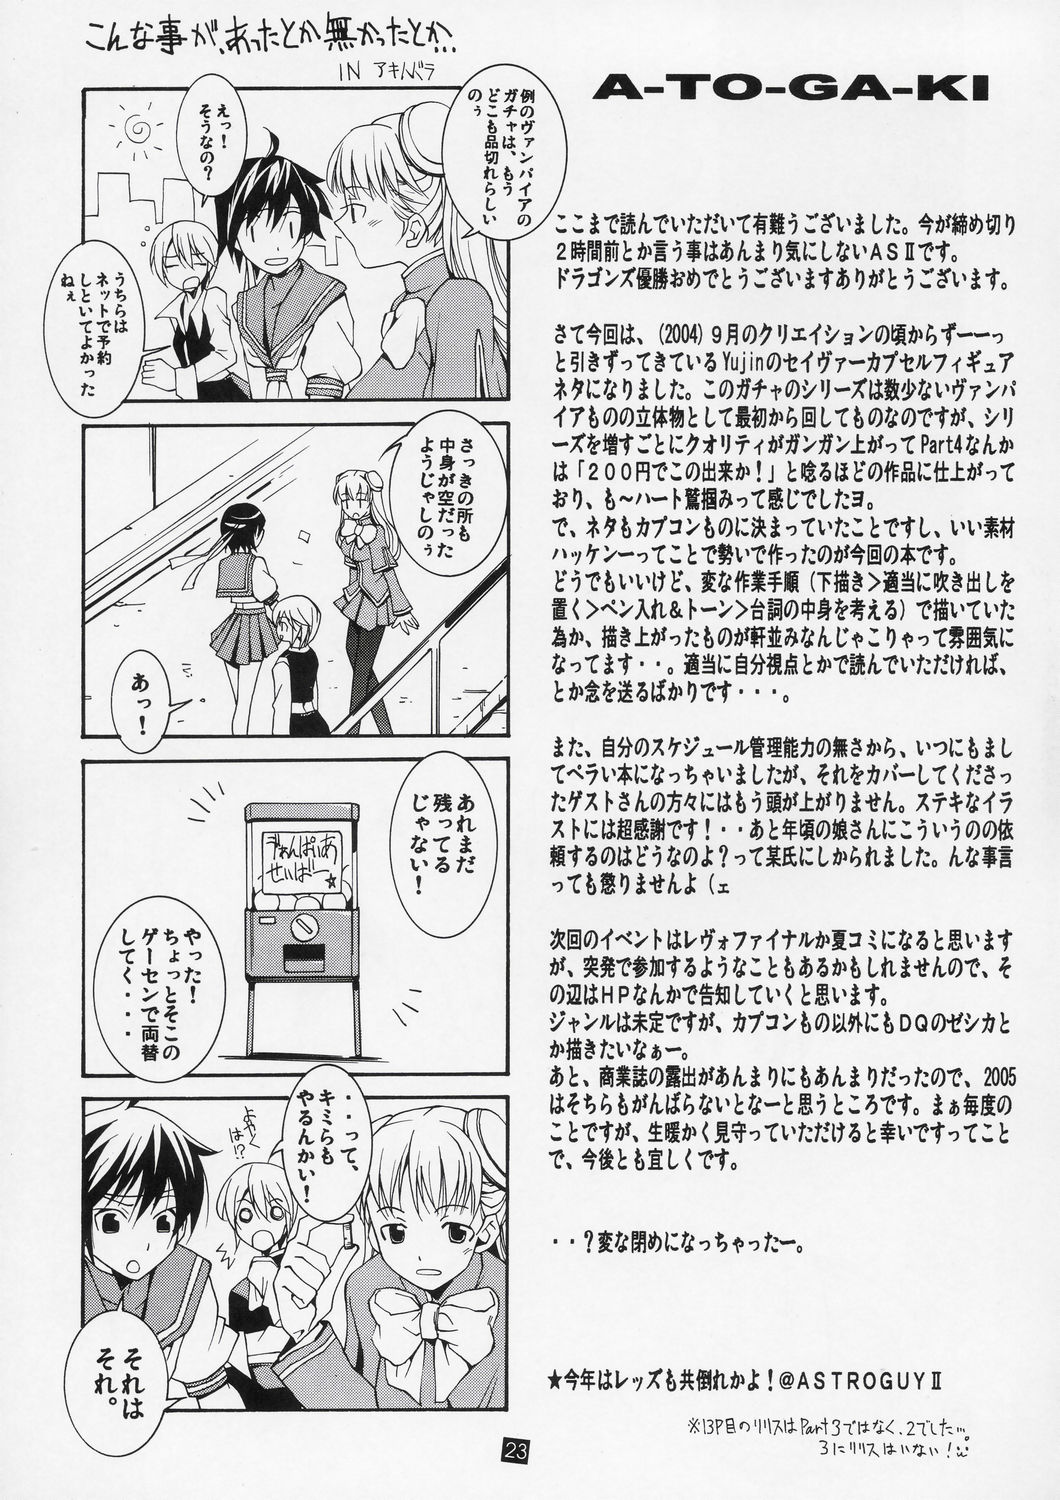 (C67) [Mushimusume Aikoukai (ASTROGUYII)] CAP+PLUS+COLLE (DarkStalkers) [2nd Edition 2005-01-19] page 24 full